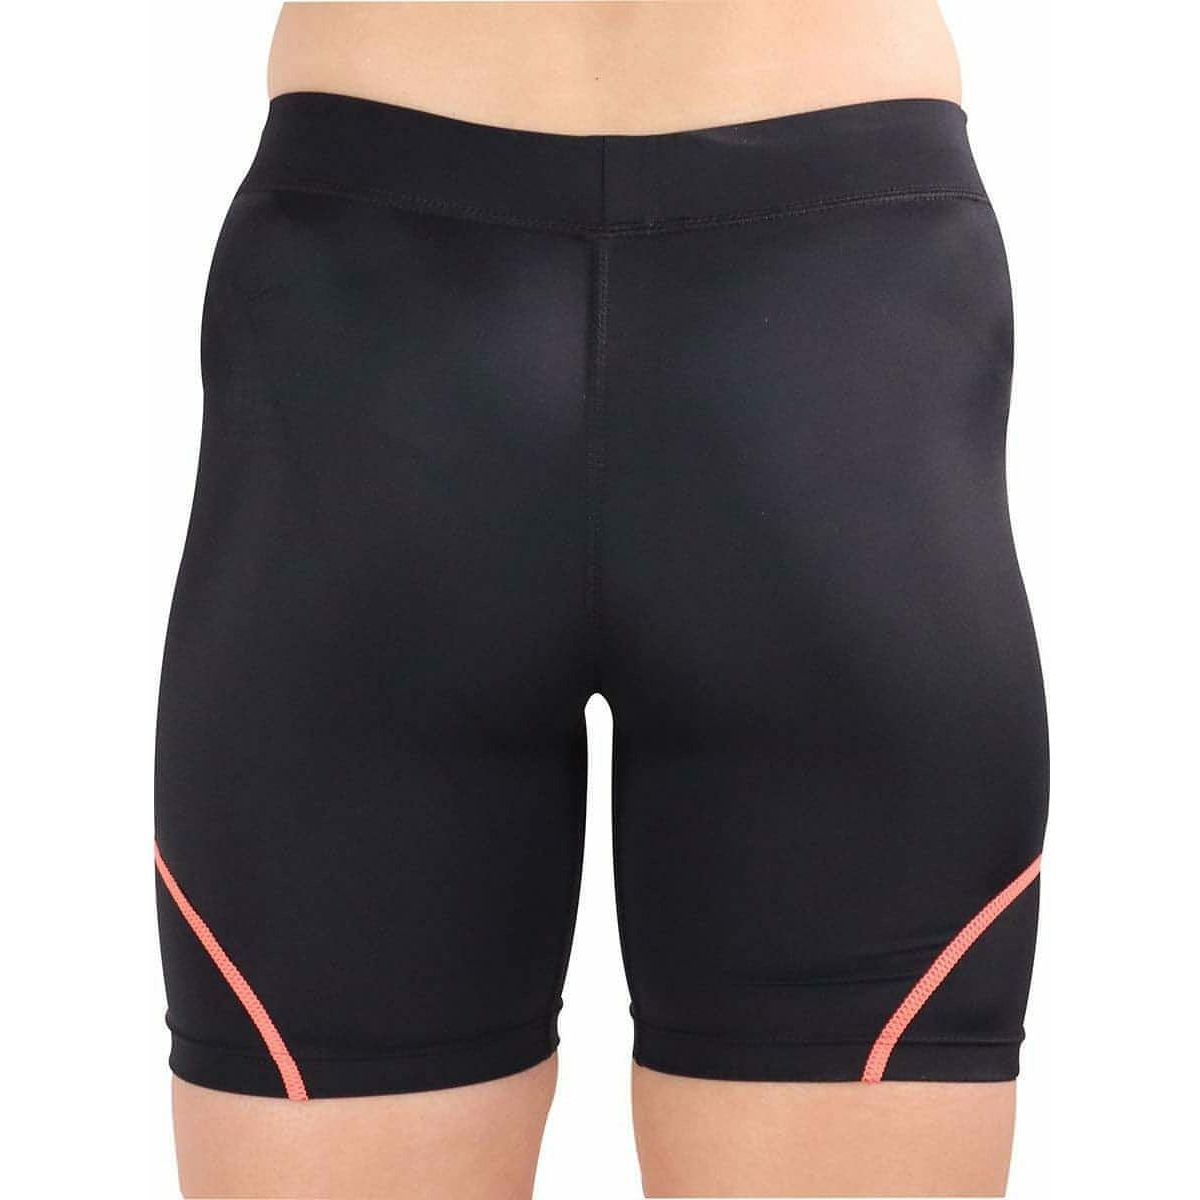 More Mile Compression Womens Short Running Tights - Black - Start Fitness